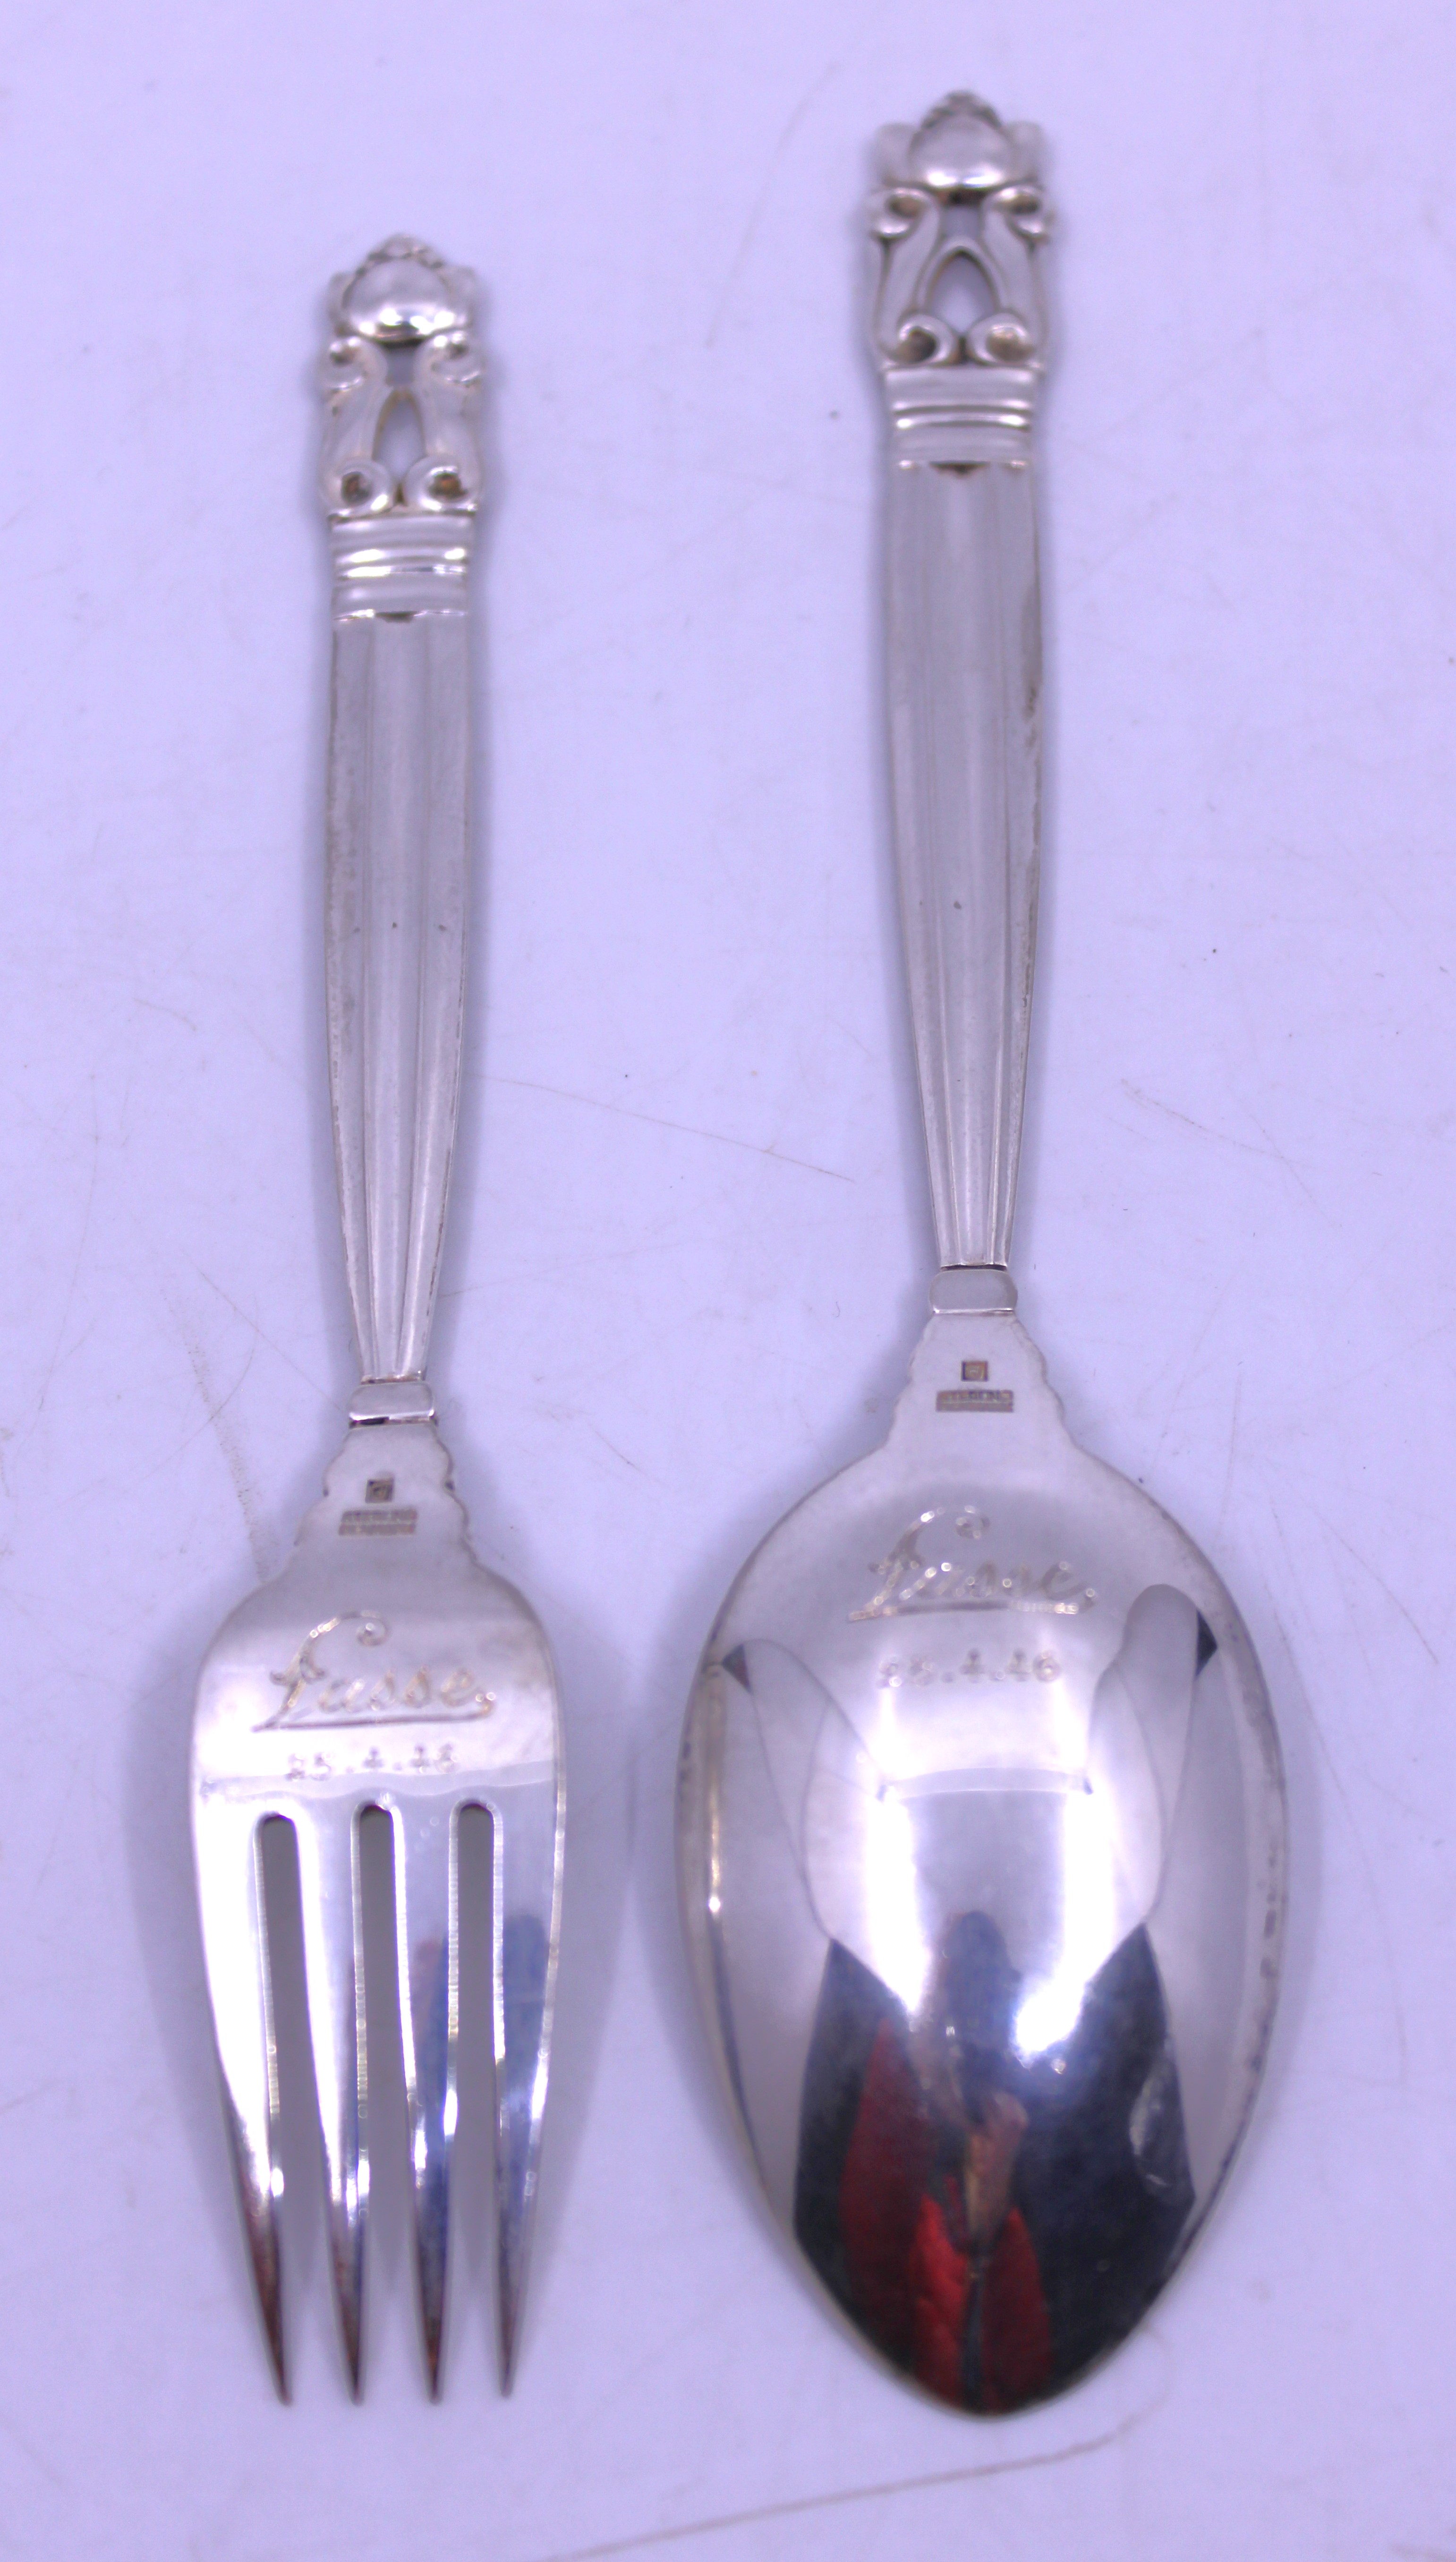 Georg Jensen Sterling Silver Spoon and Fork in the Acorn Pattern.  The Acorn Pattern was one of - Image 2 of 4